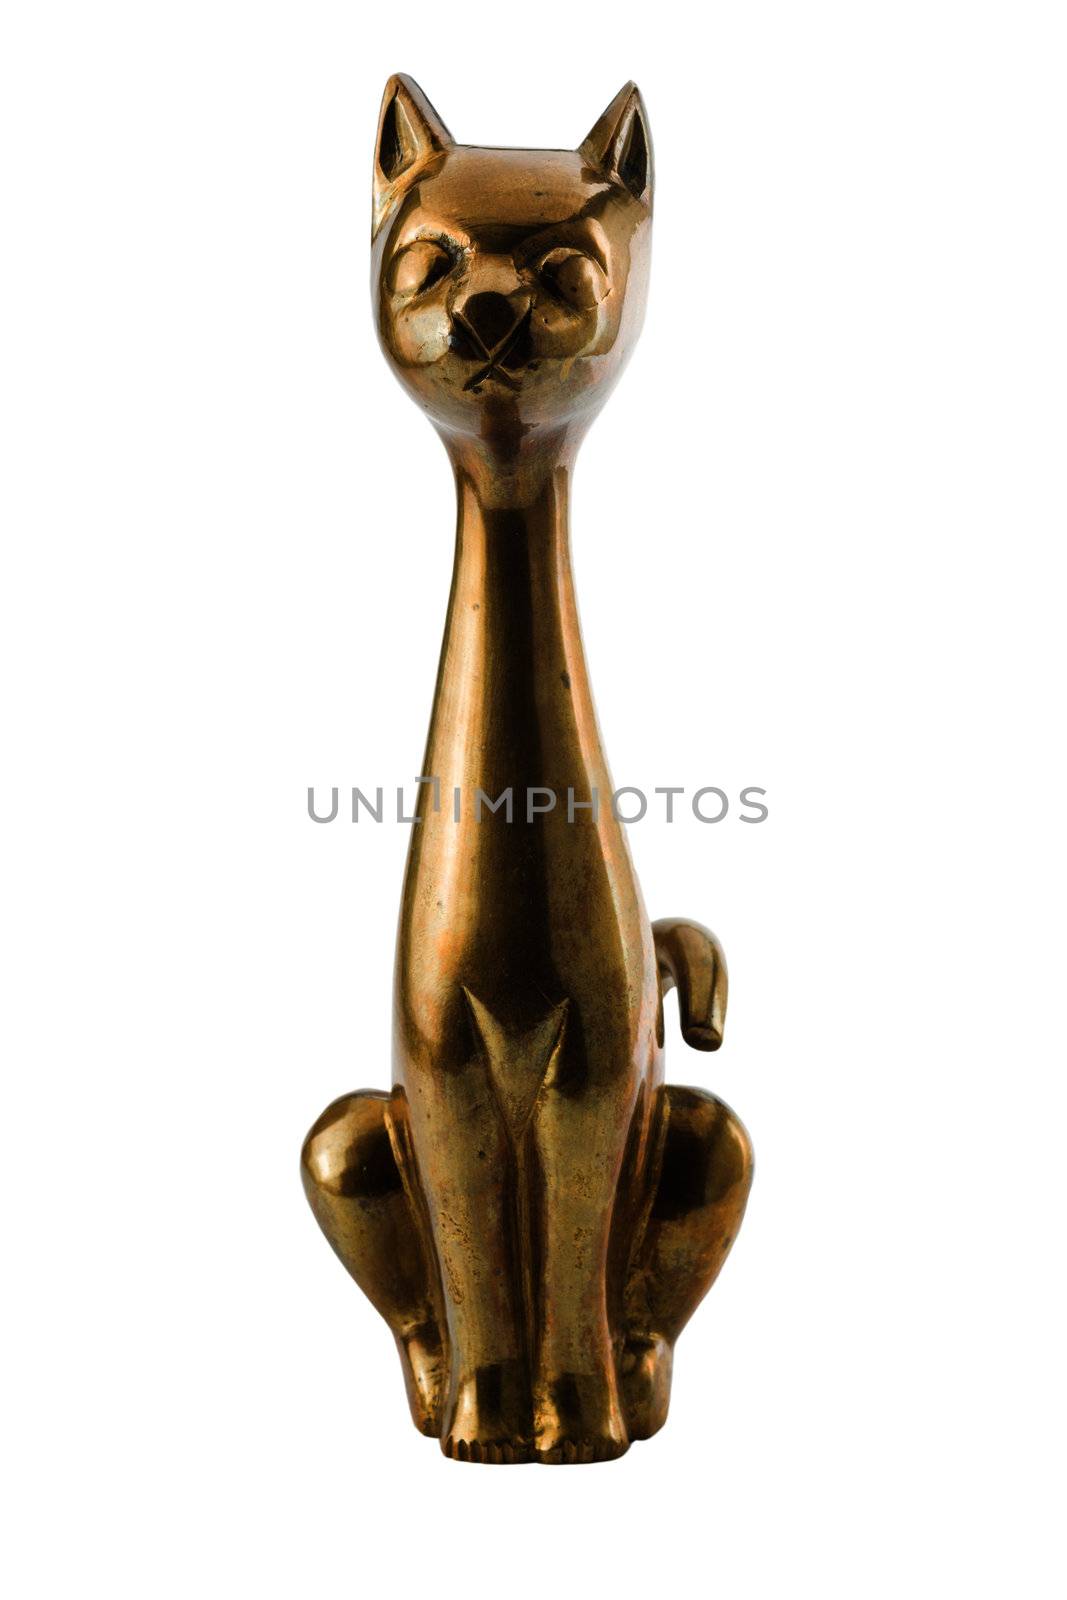 Brass figure of the metalic cat over the white by dedron